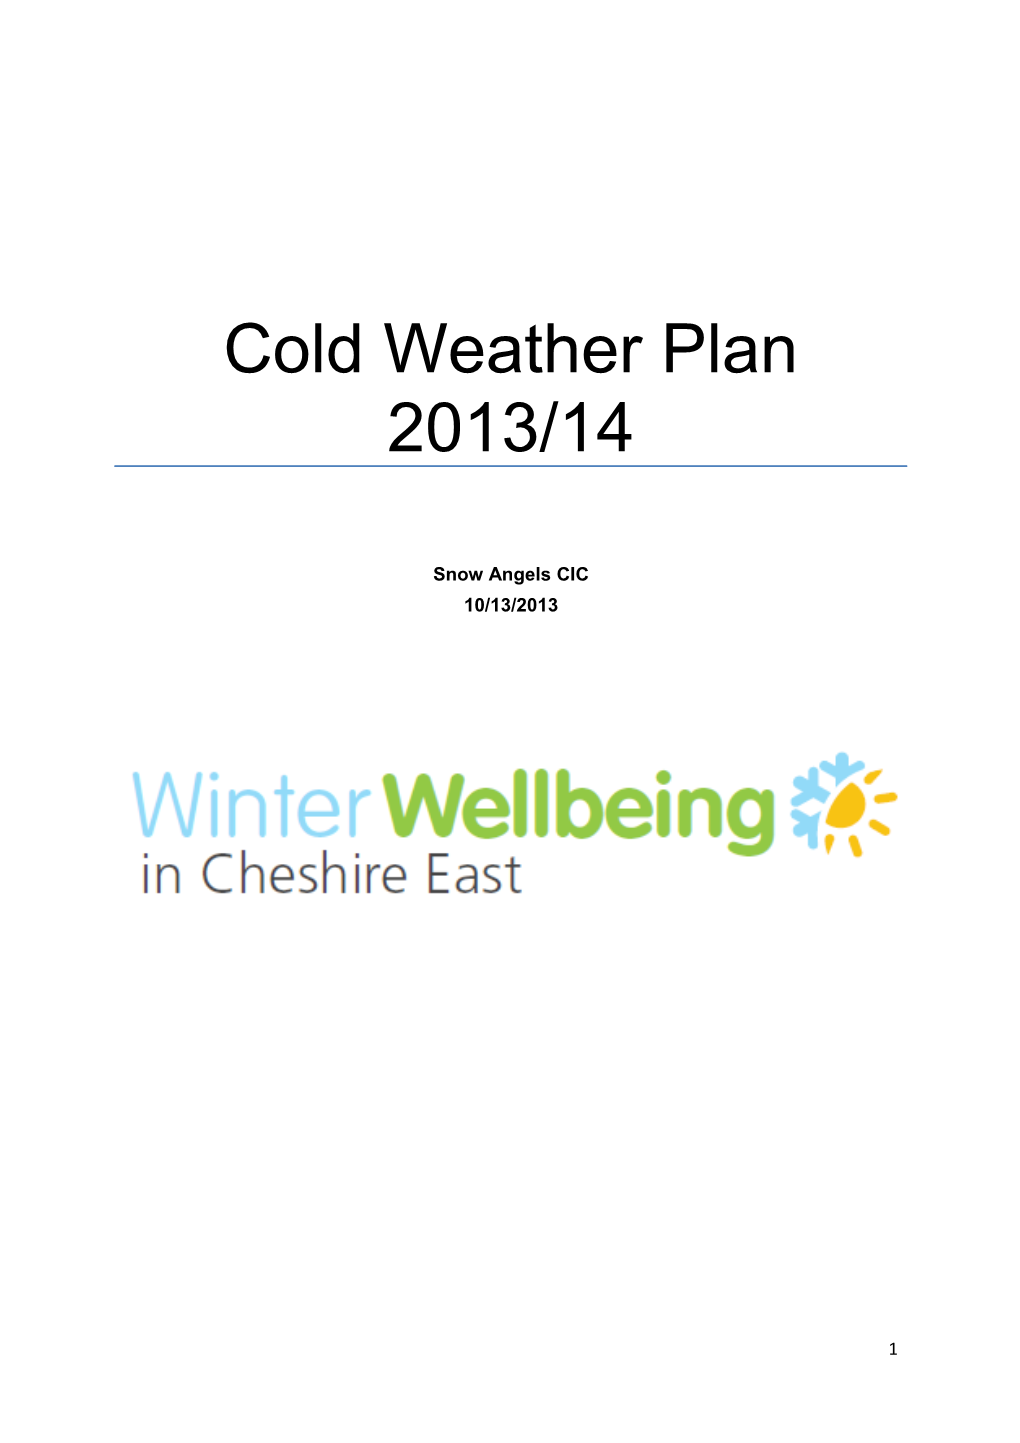 Cold Weather Plan 2013/14